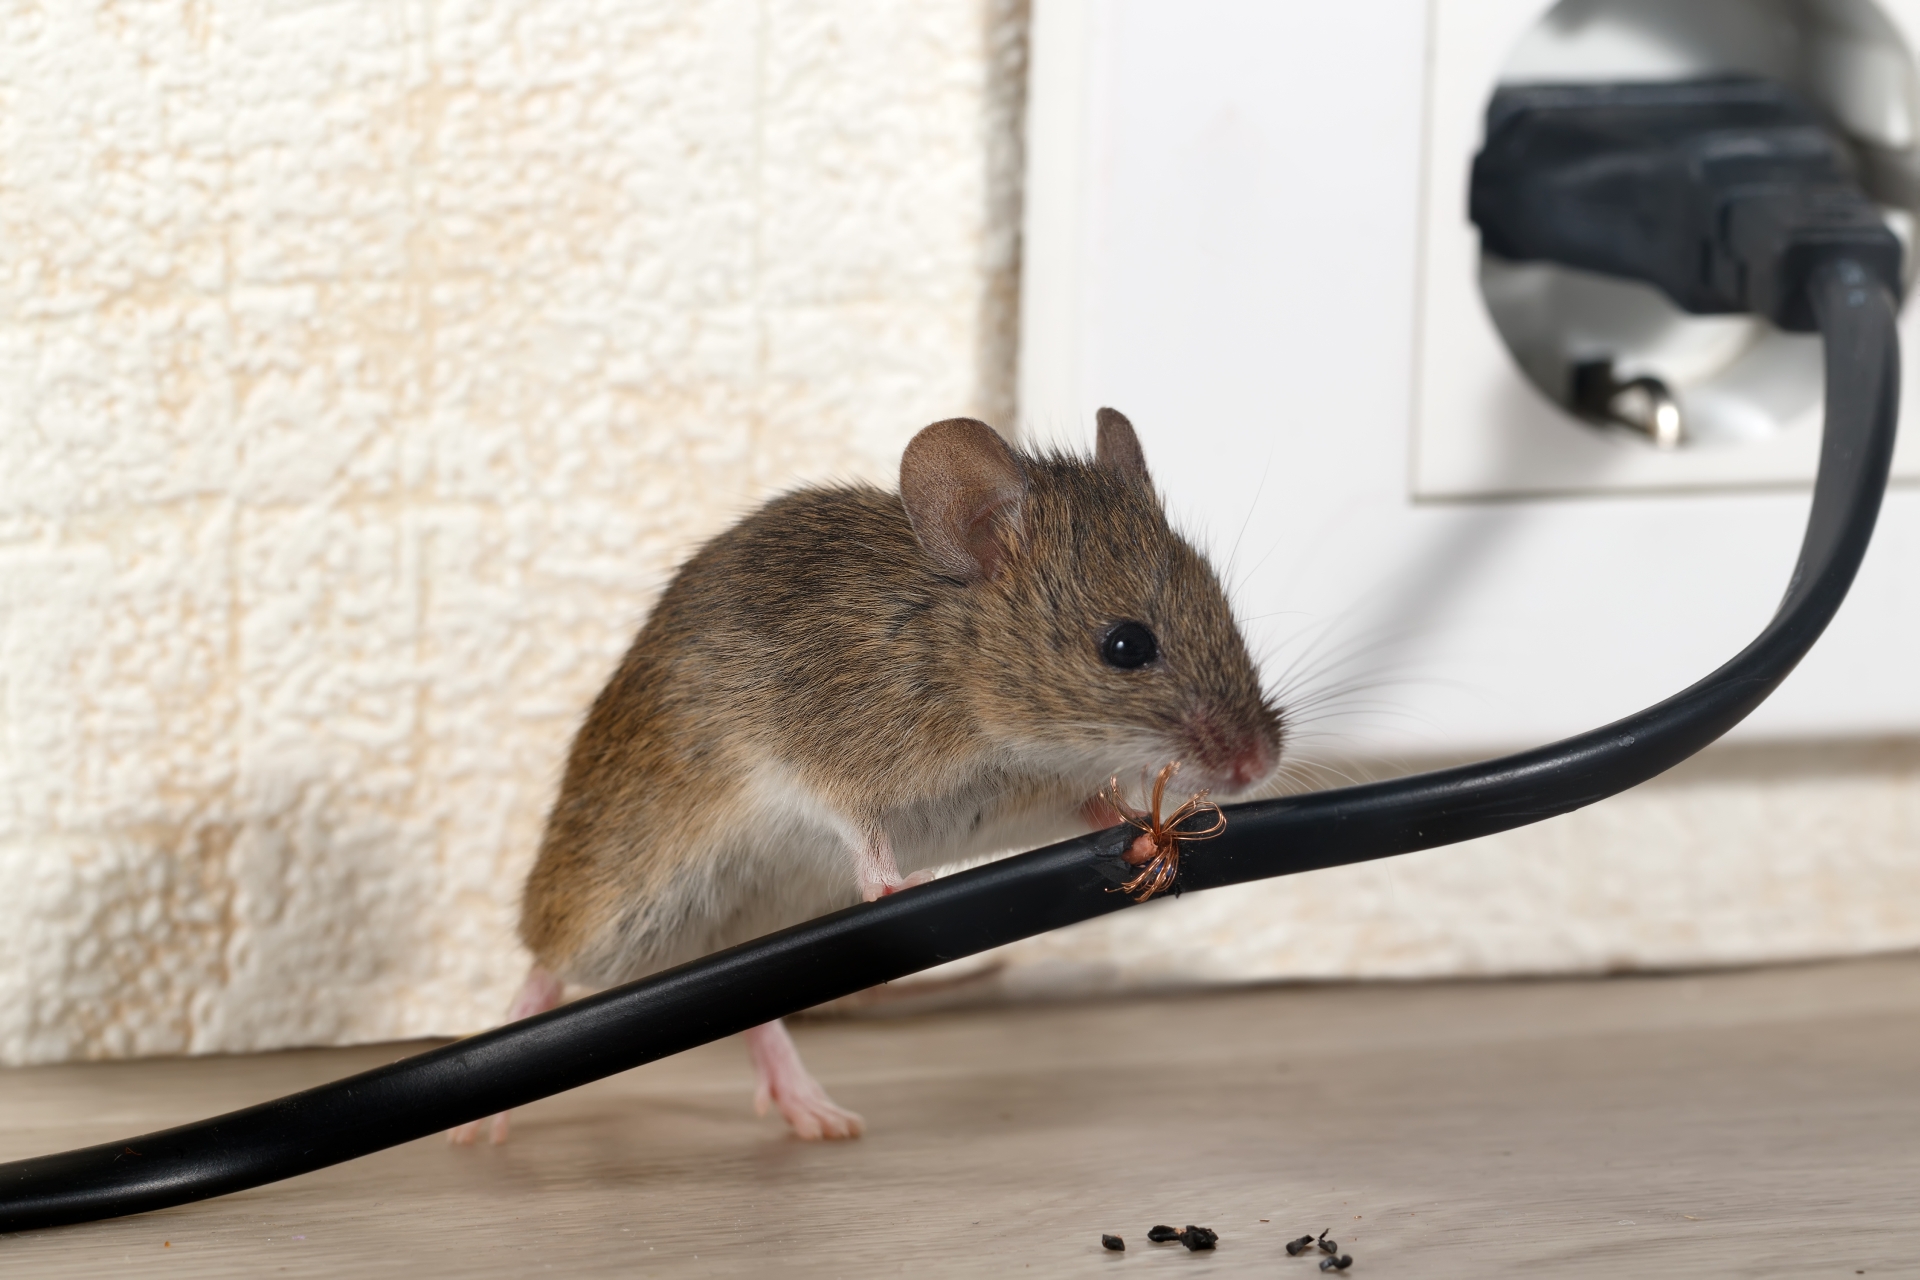 Mice Infestation, Pest Control in Addlestone, New Haw, Woodham, KT15. Call Now 020 8166 9746